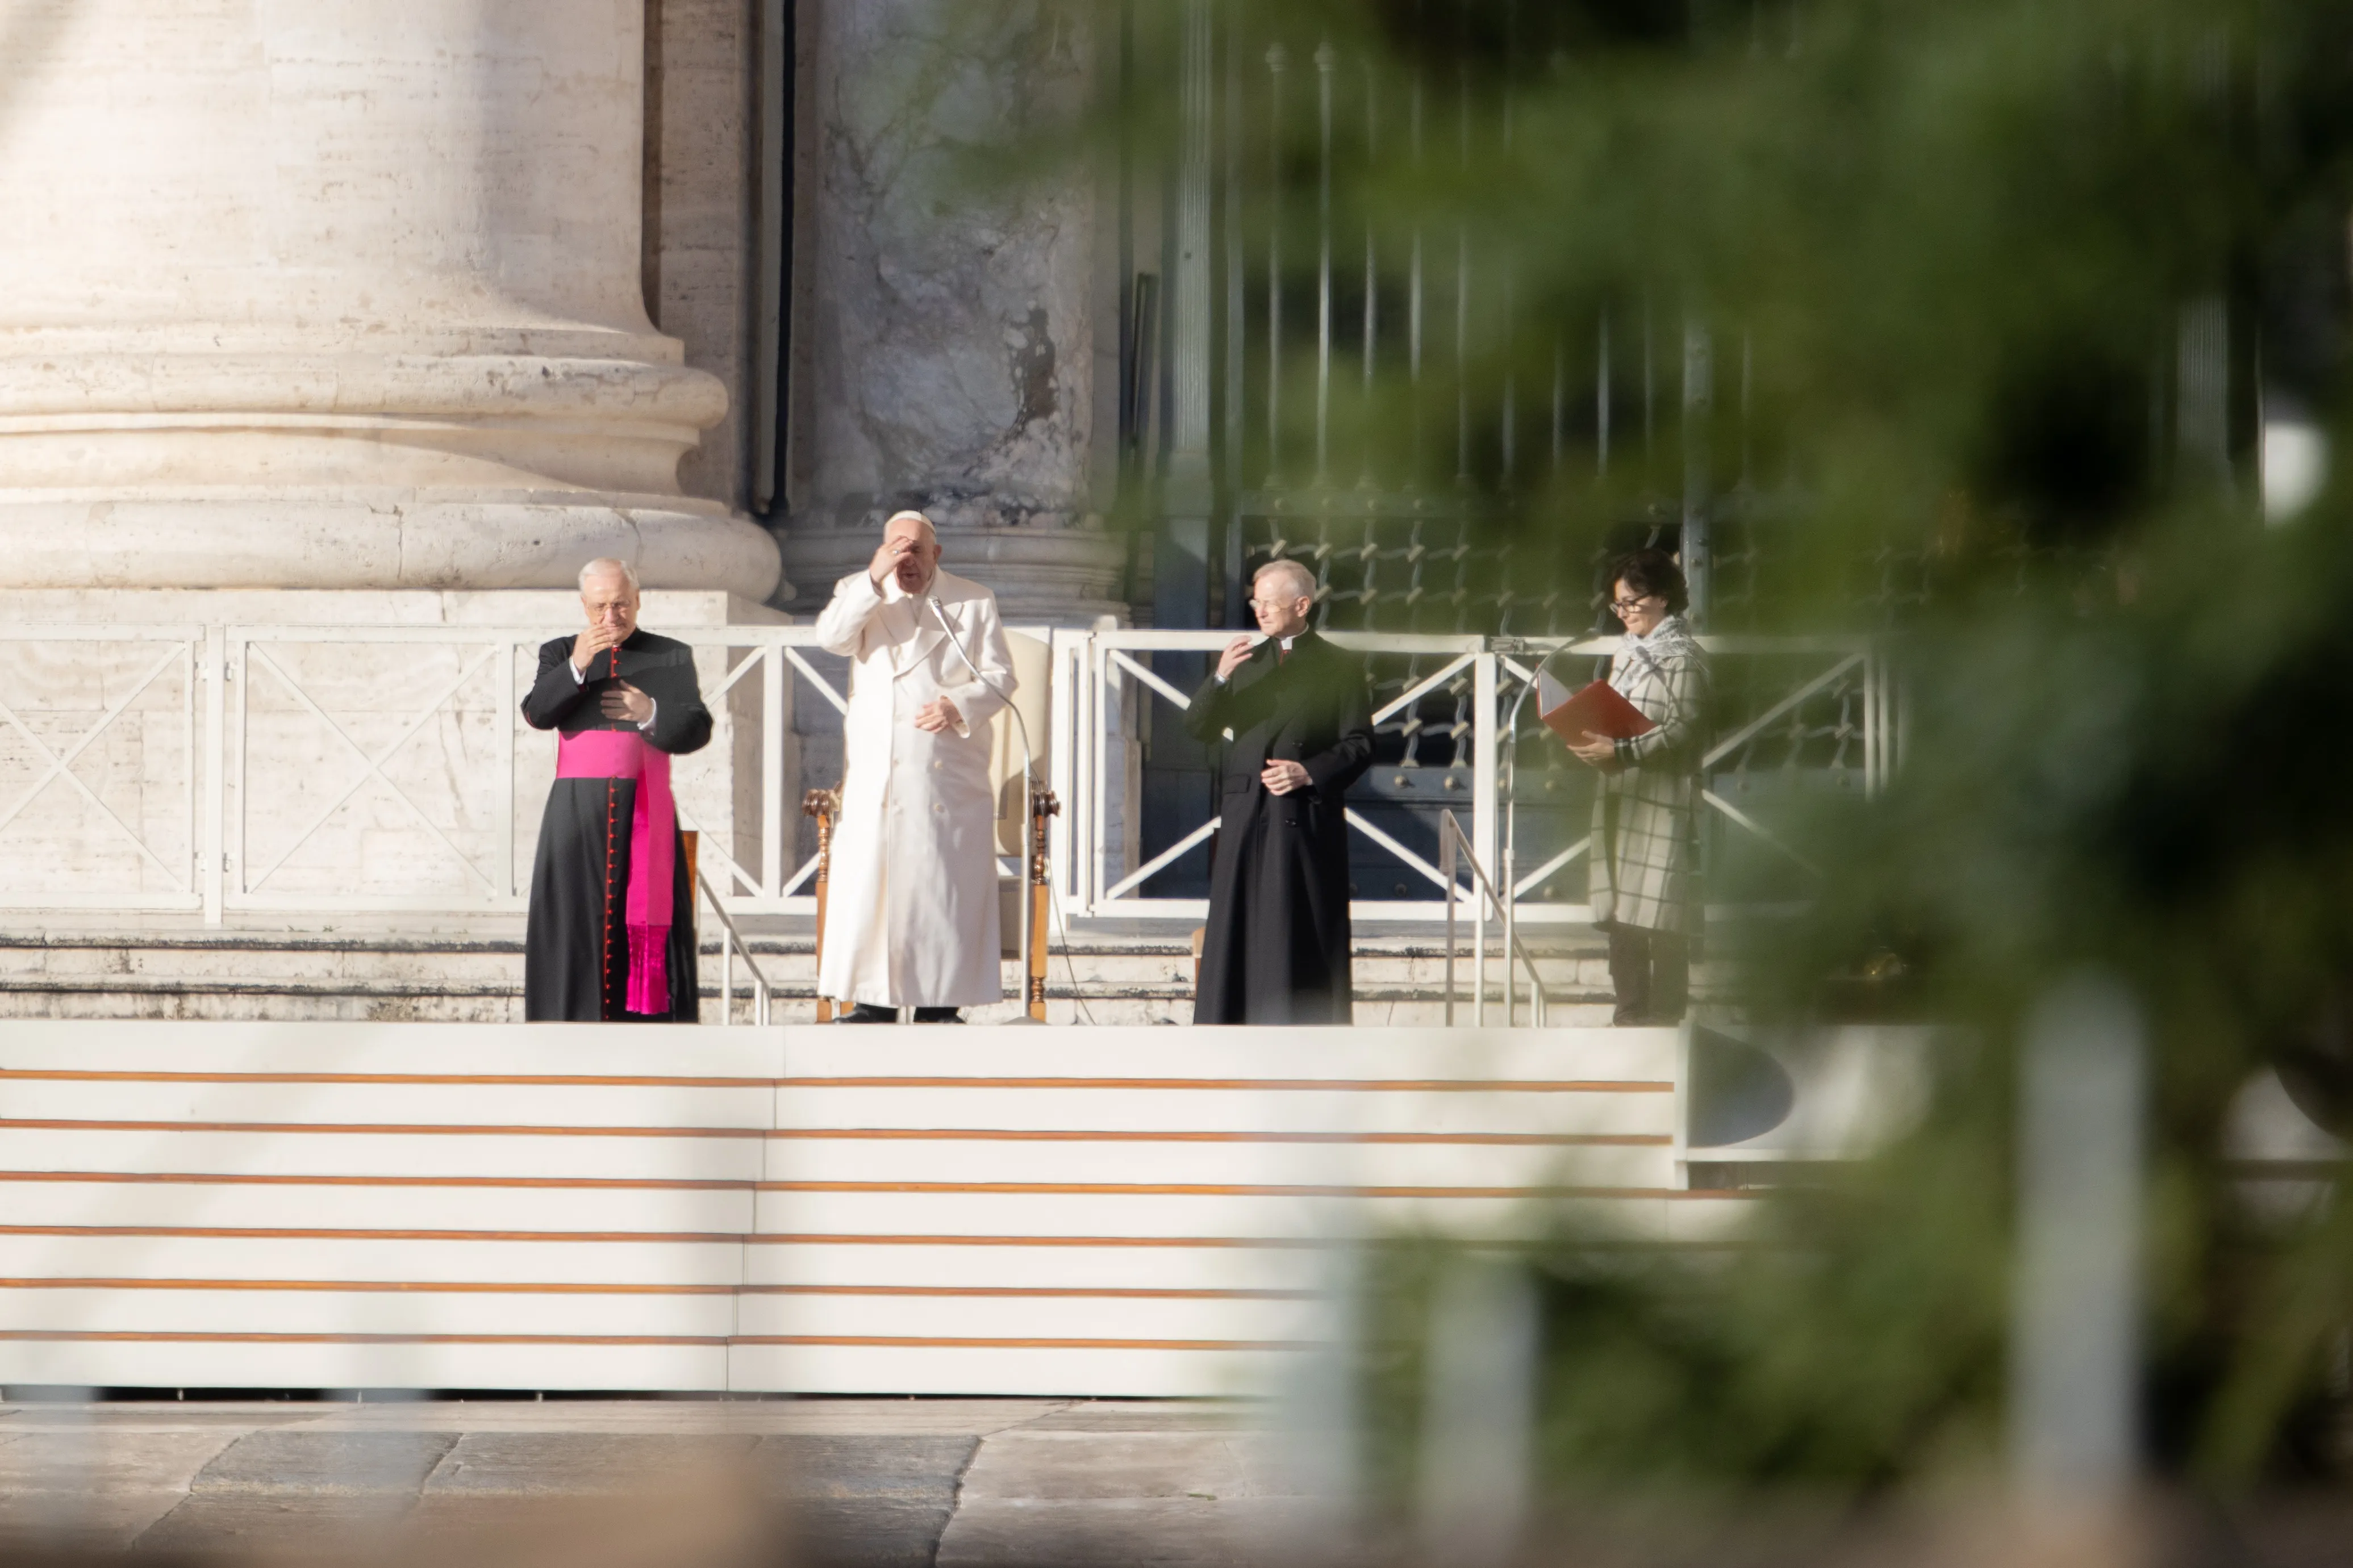 Pope Francis praying at the general audience on St. Peter's Square?w=200&h=150